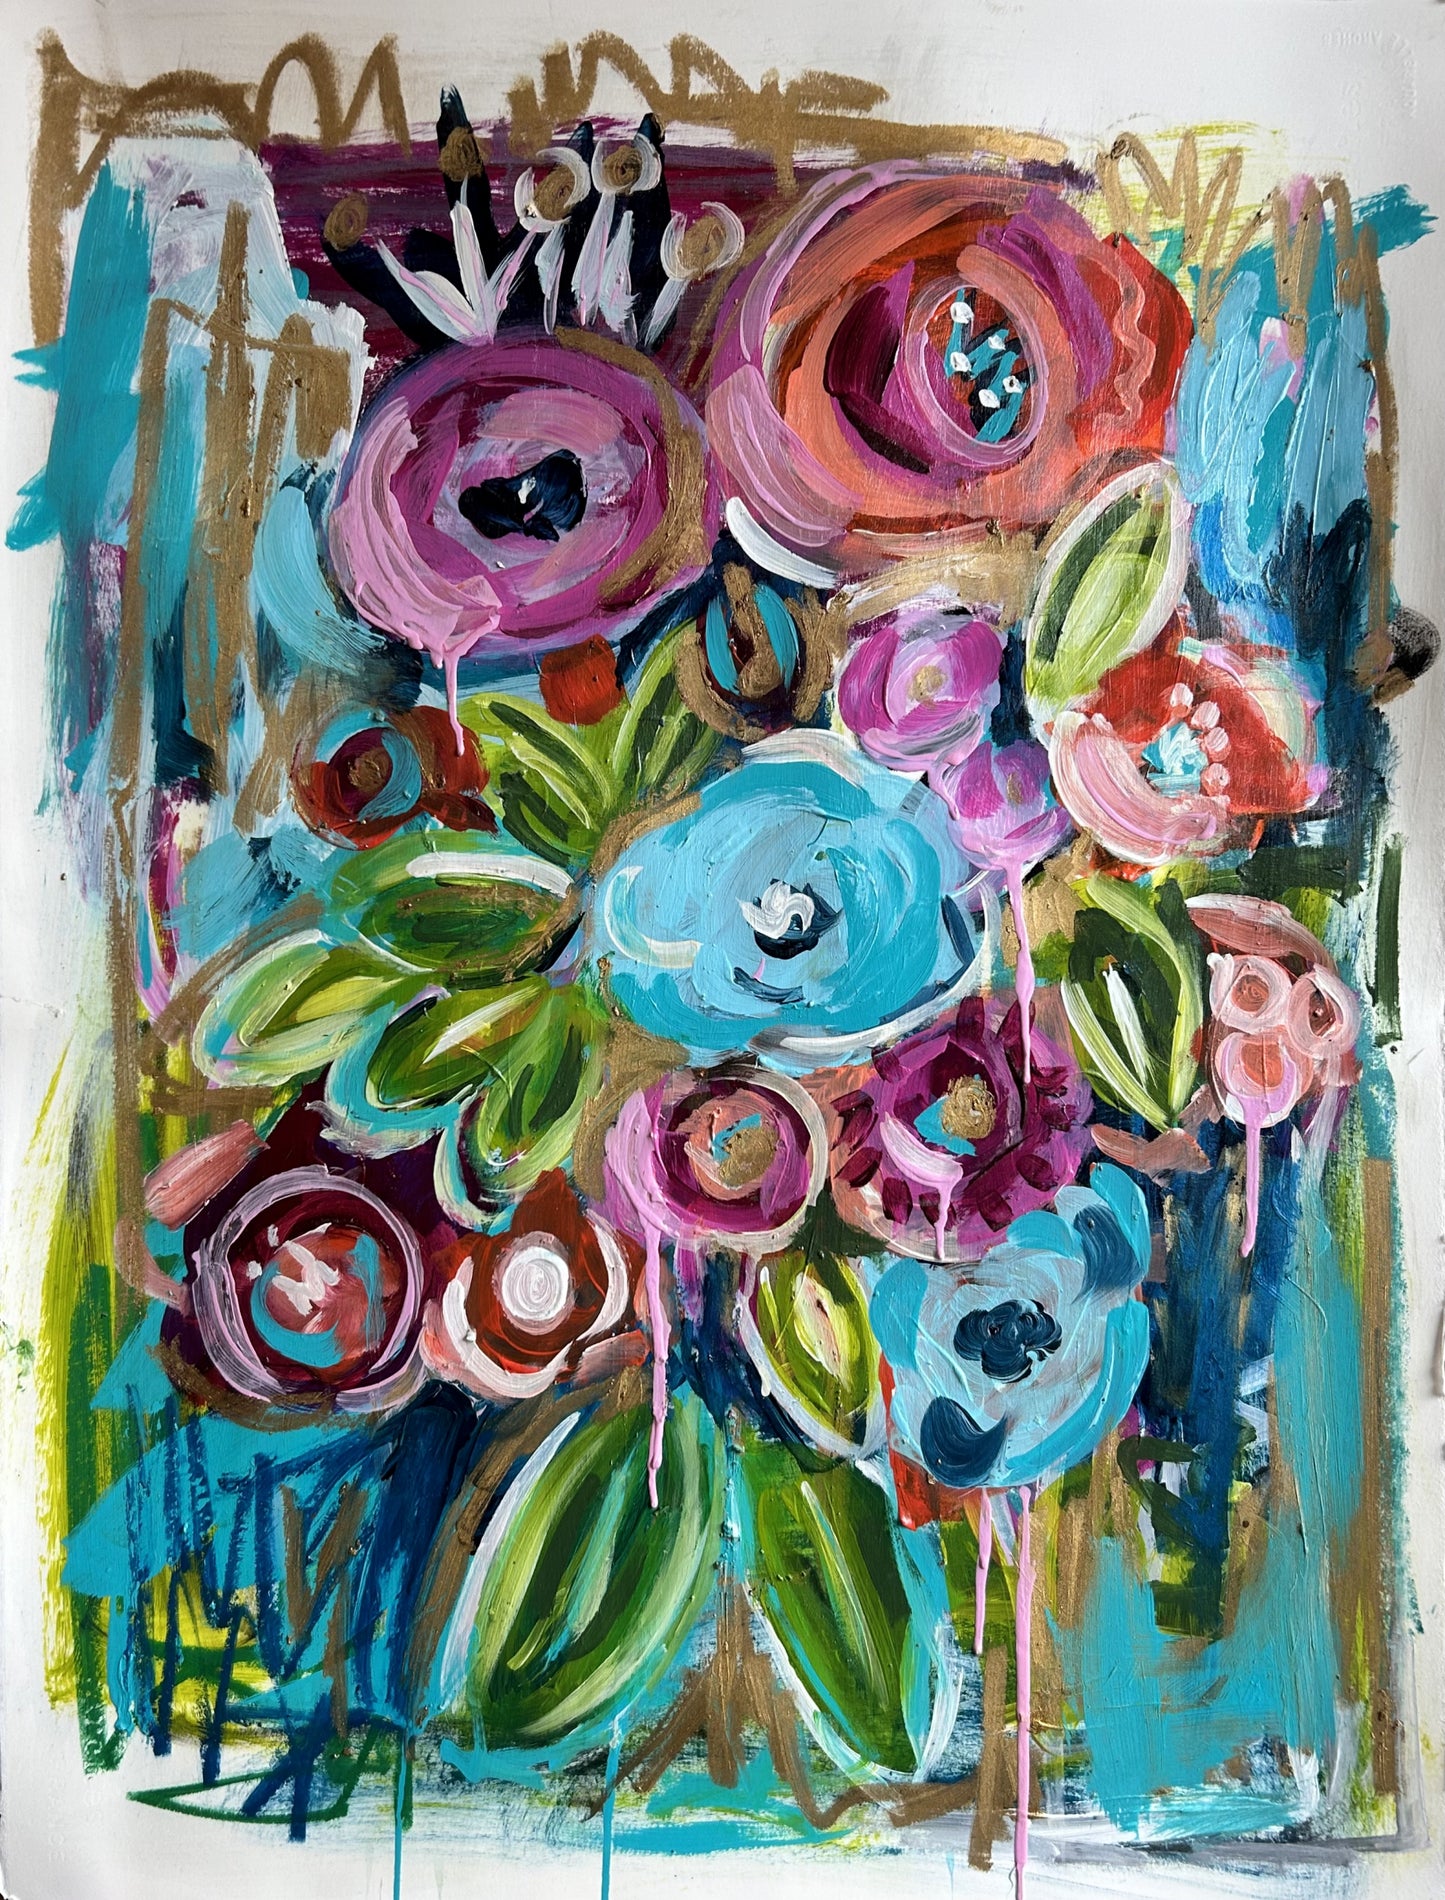 A Burst of Blooms: Colourful and Vibrant Abstract Floral Painting